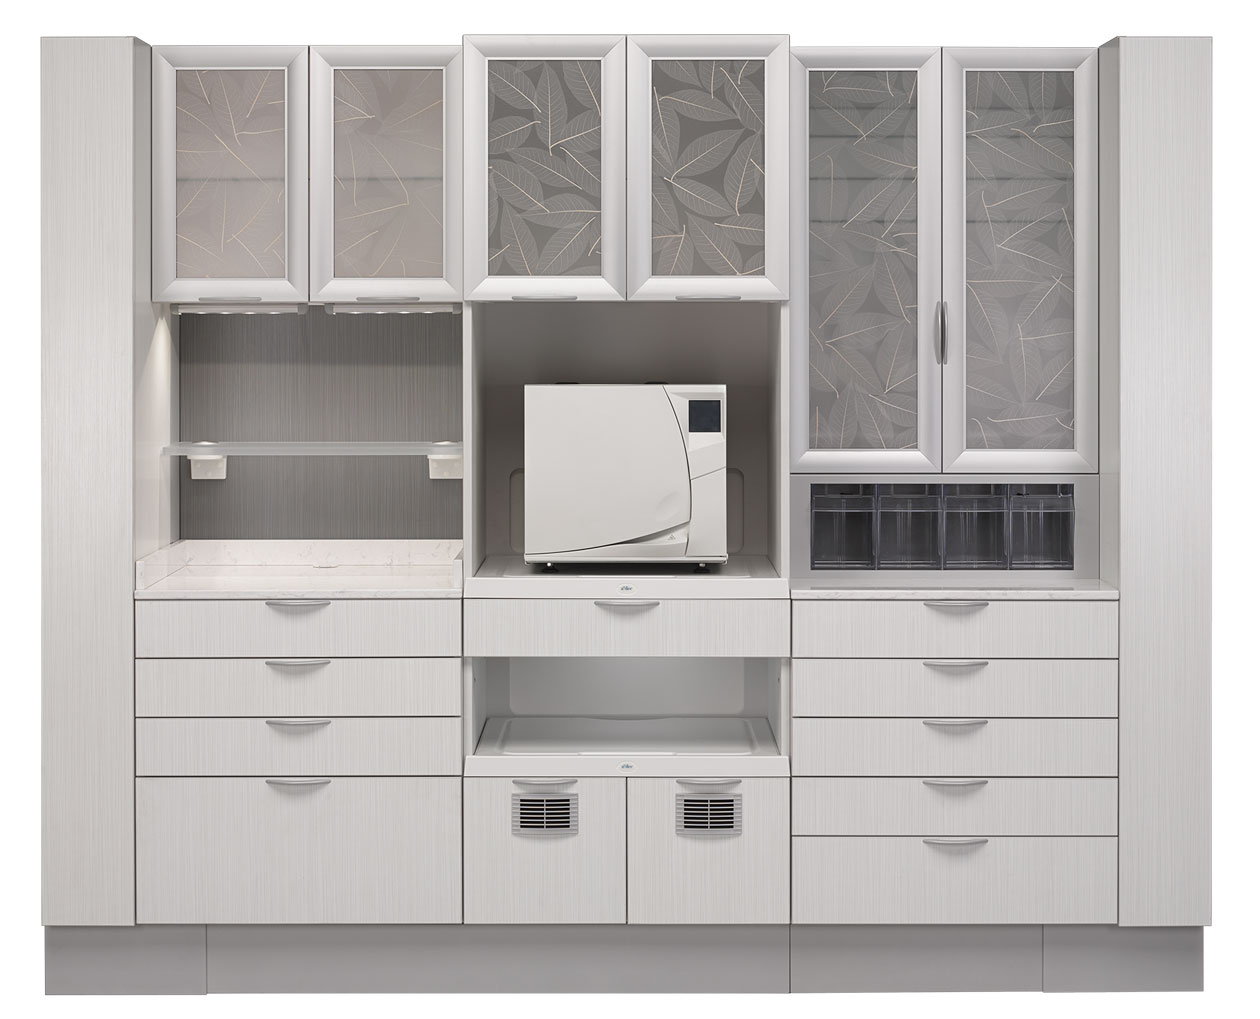 Front view of A-dec Inspire 594 sterilization center in white with white infills